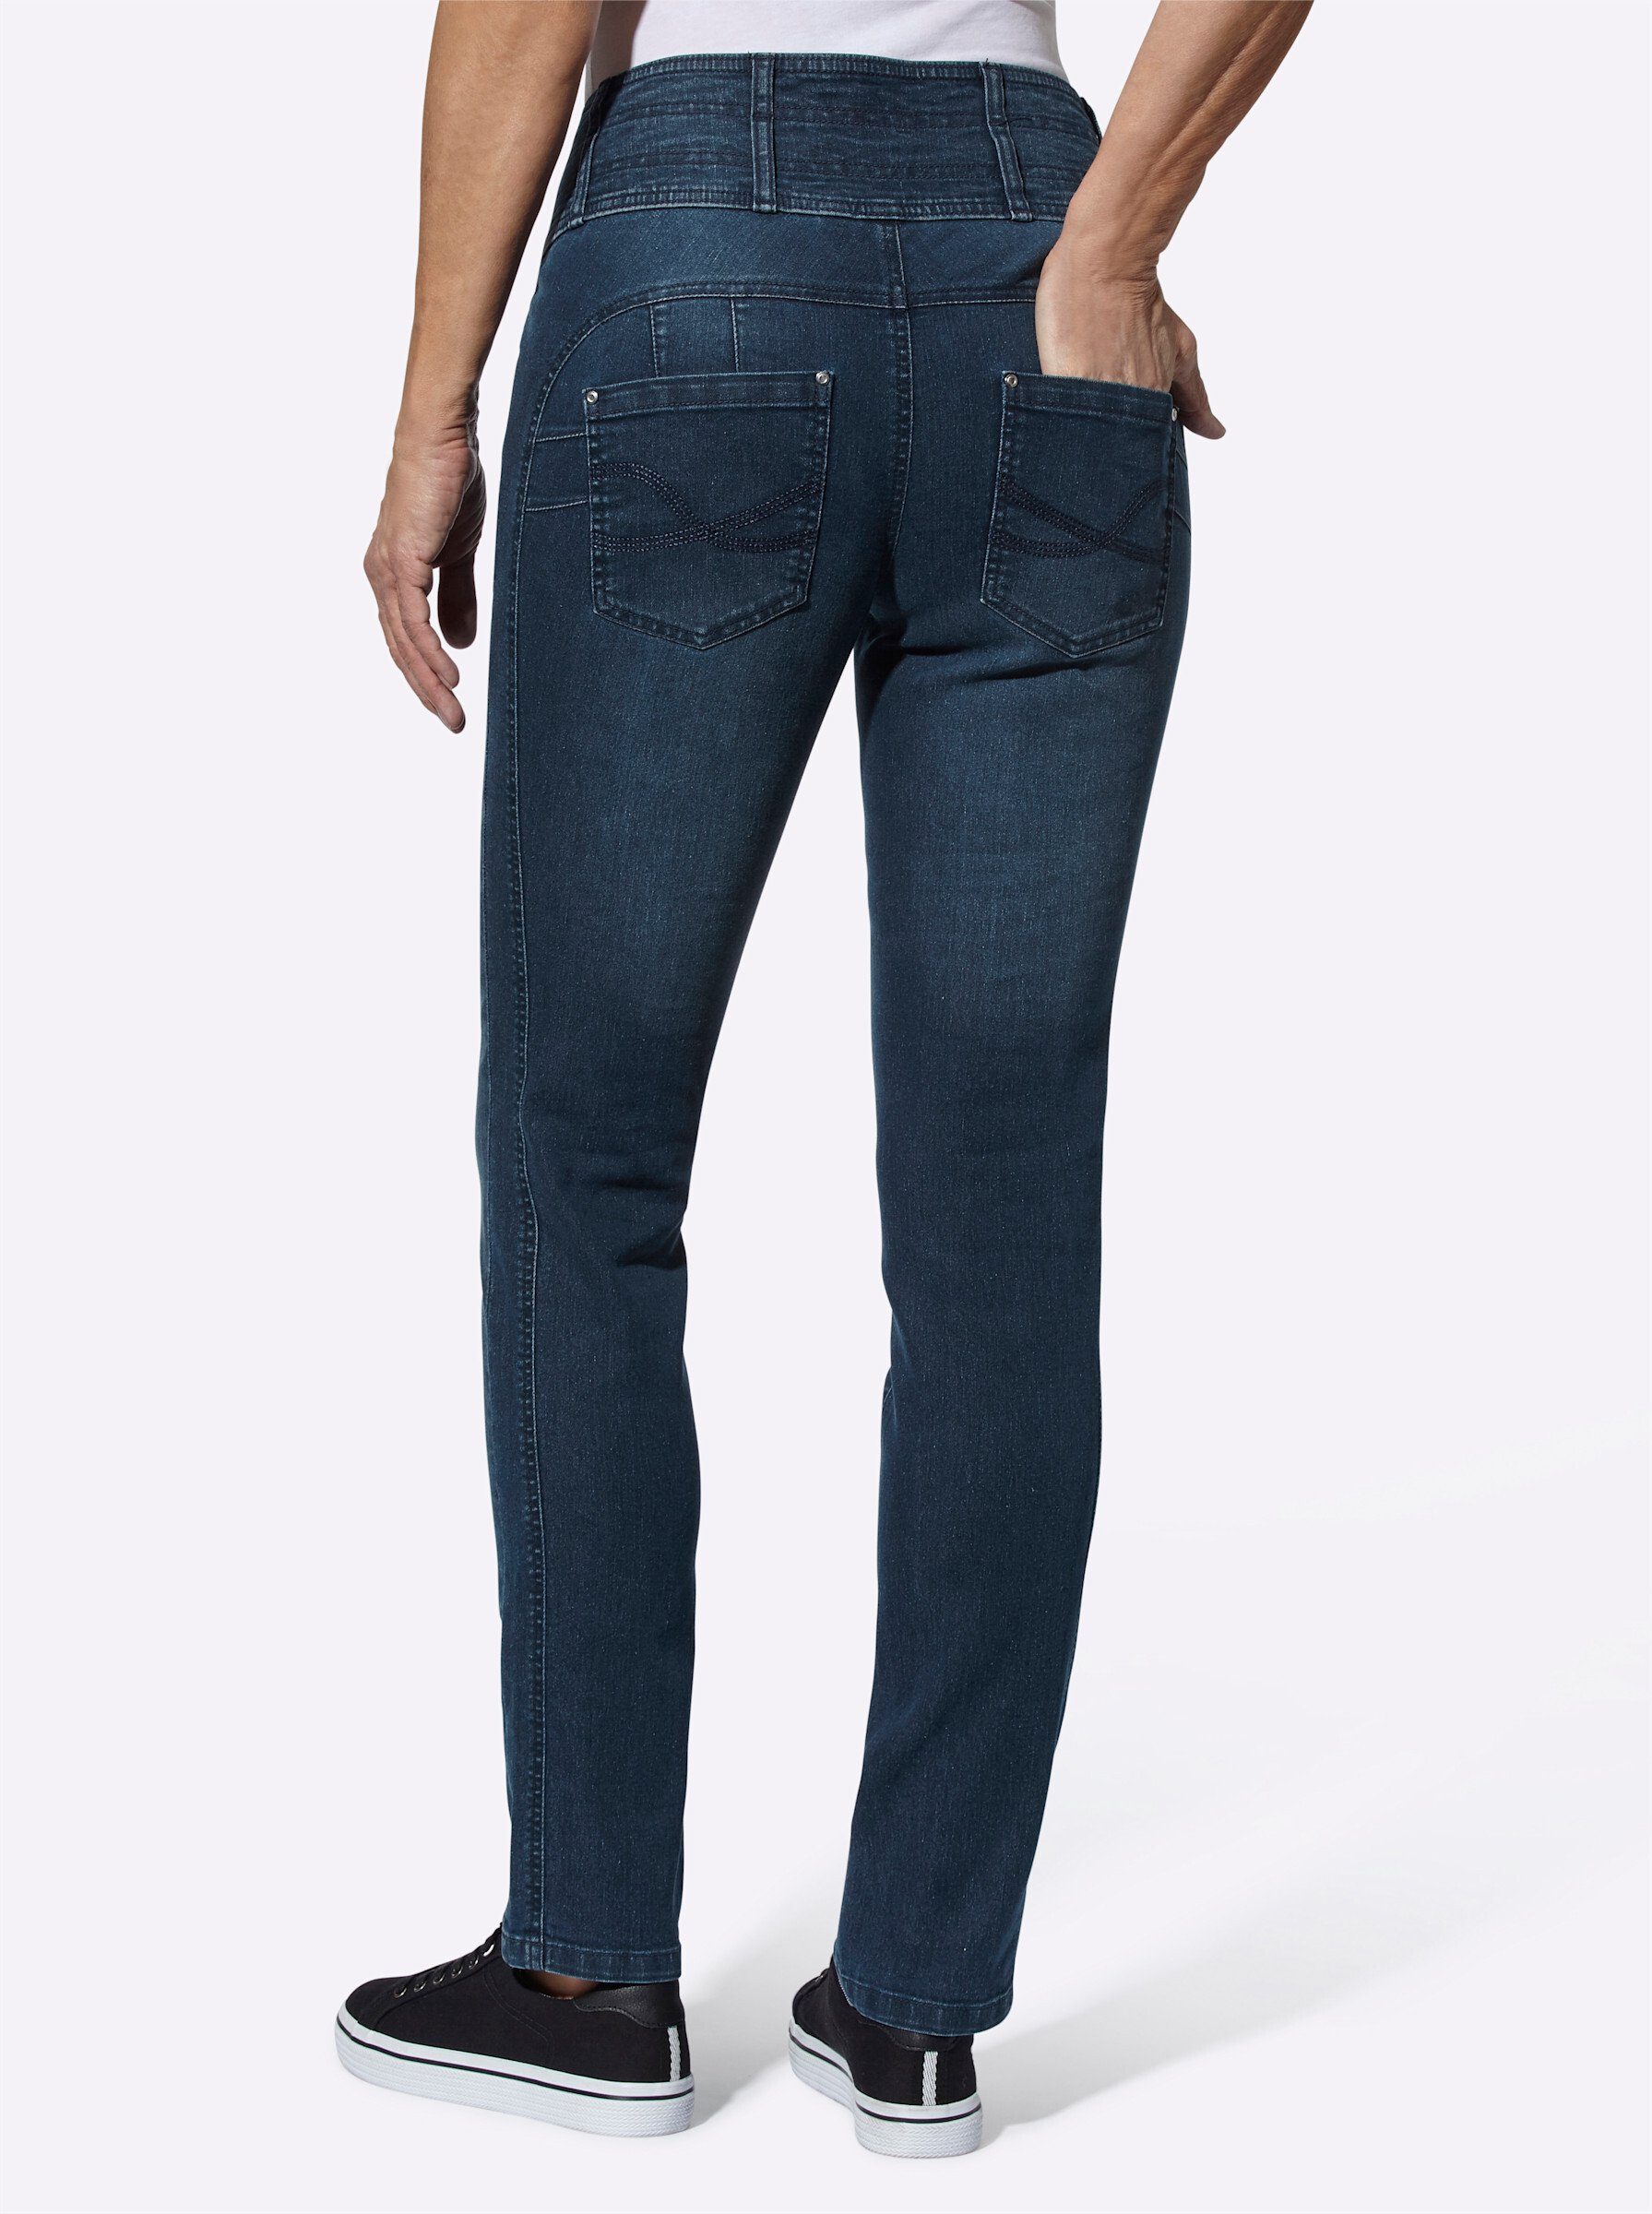 Jeans Bequeme an! Sieh blue-stone-washed